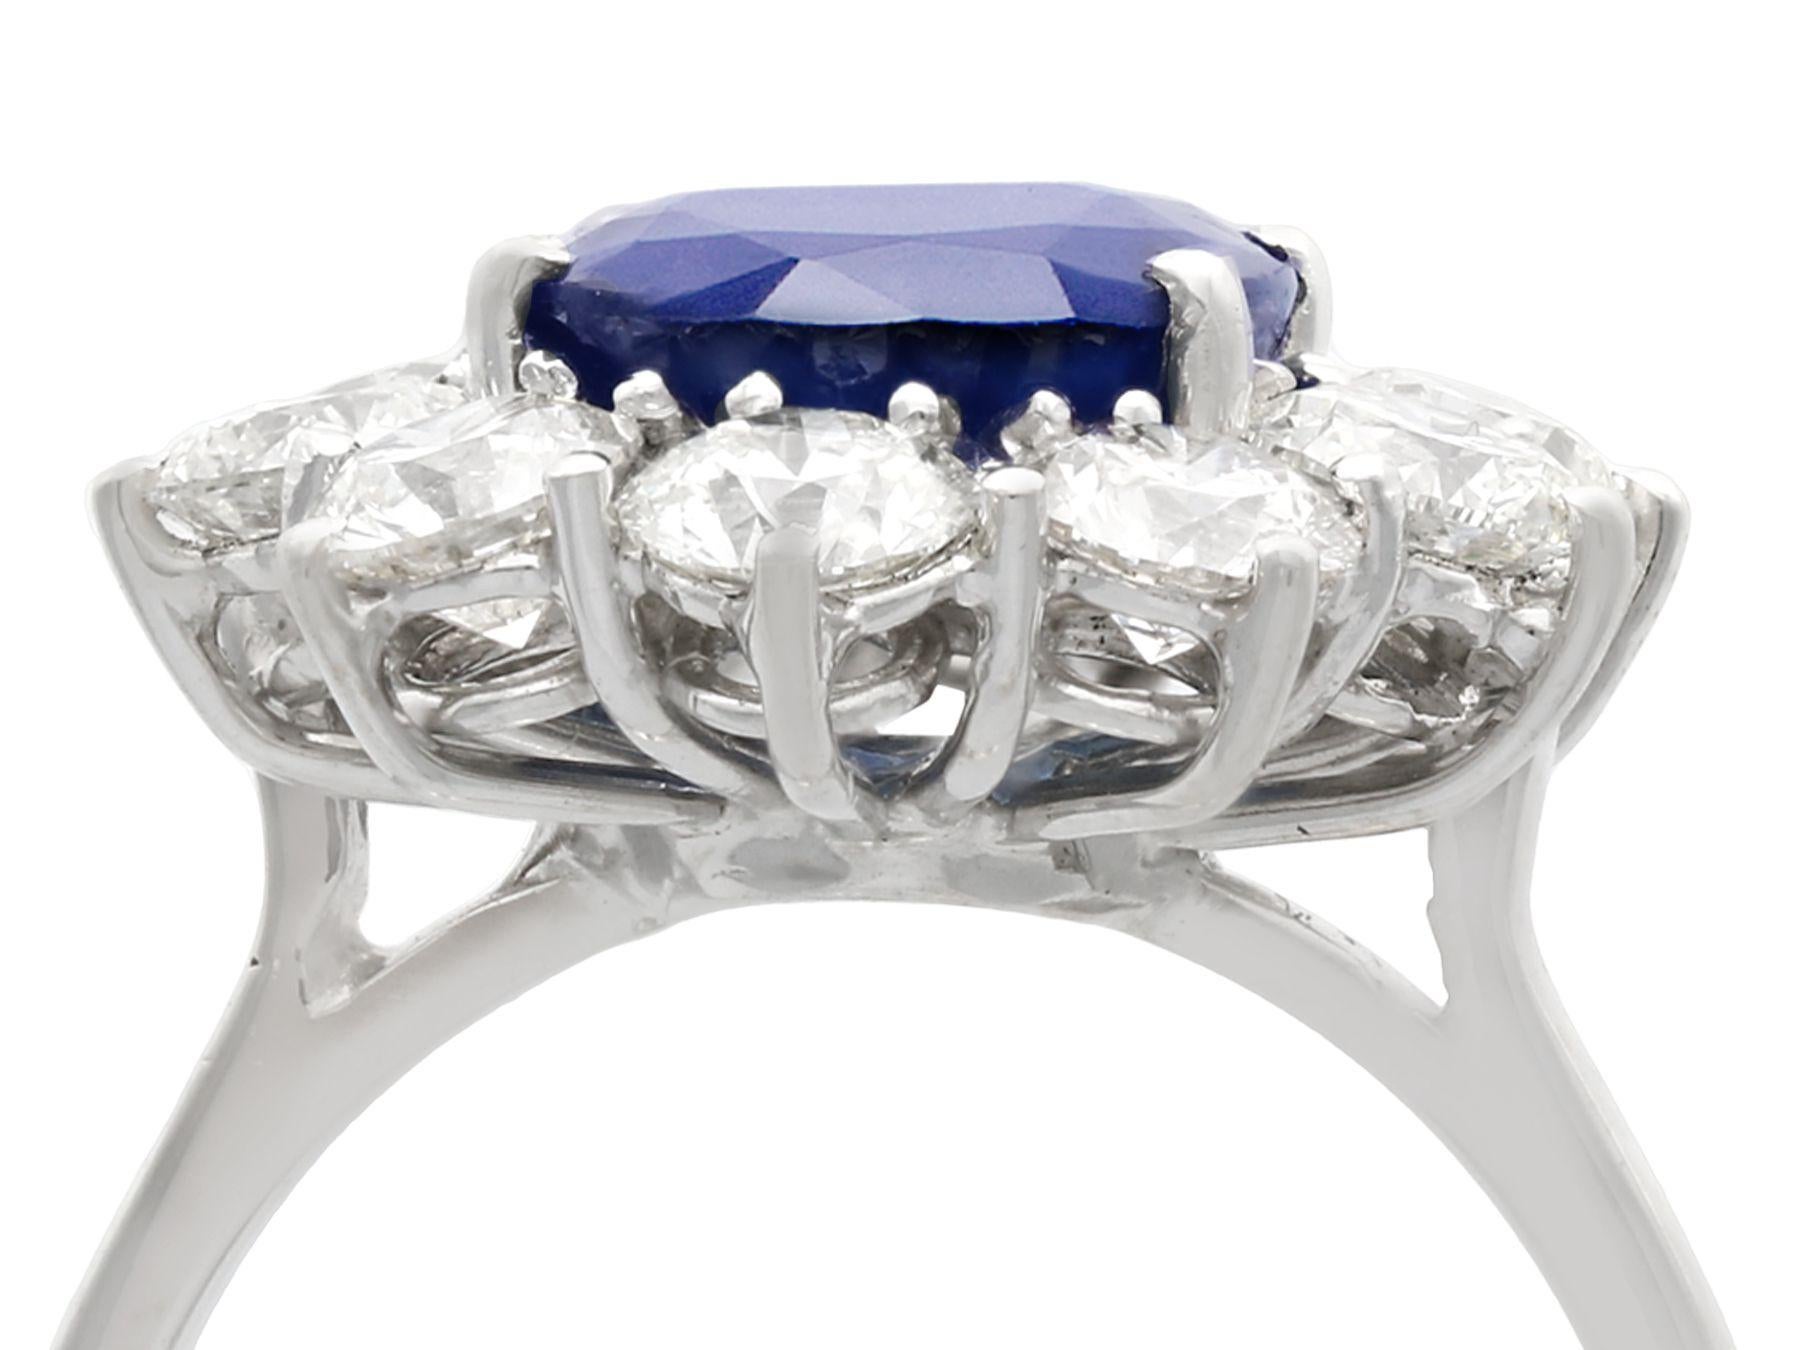 A stunning vintage 4.29 carat sapphire and 1.80 carat diamond, 18 karat white gold cluster ring; part of our diverse vintage jewelry and estate jewelry collections.

This stunning, fine and impressive vintage sapphire and diamond ring has been